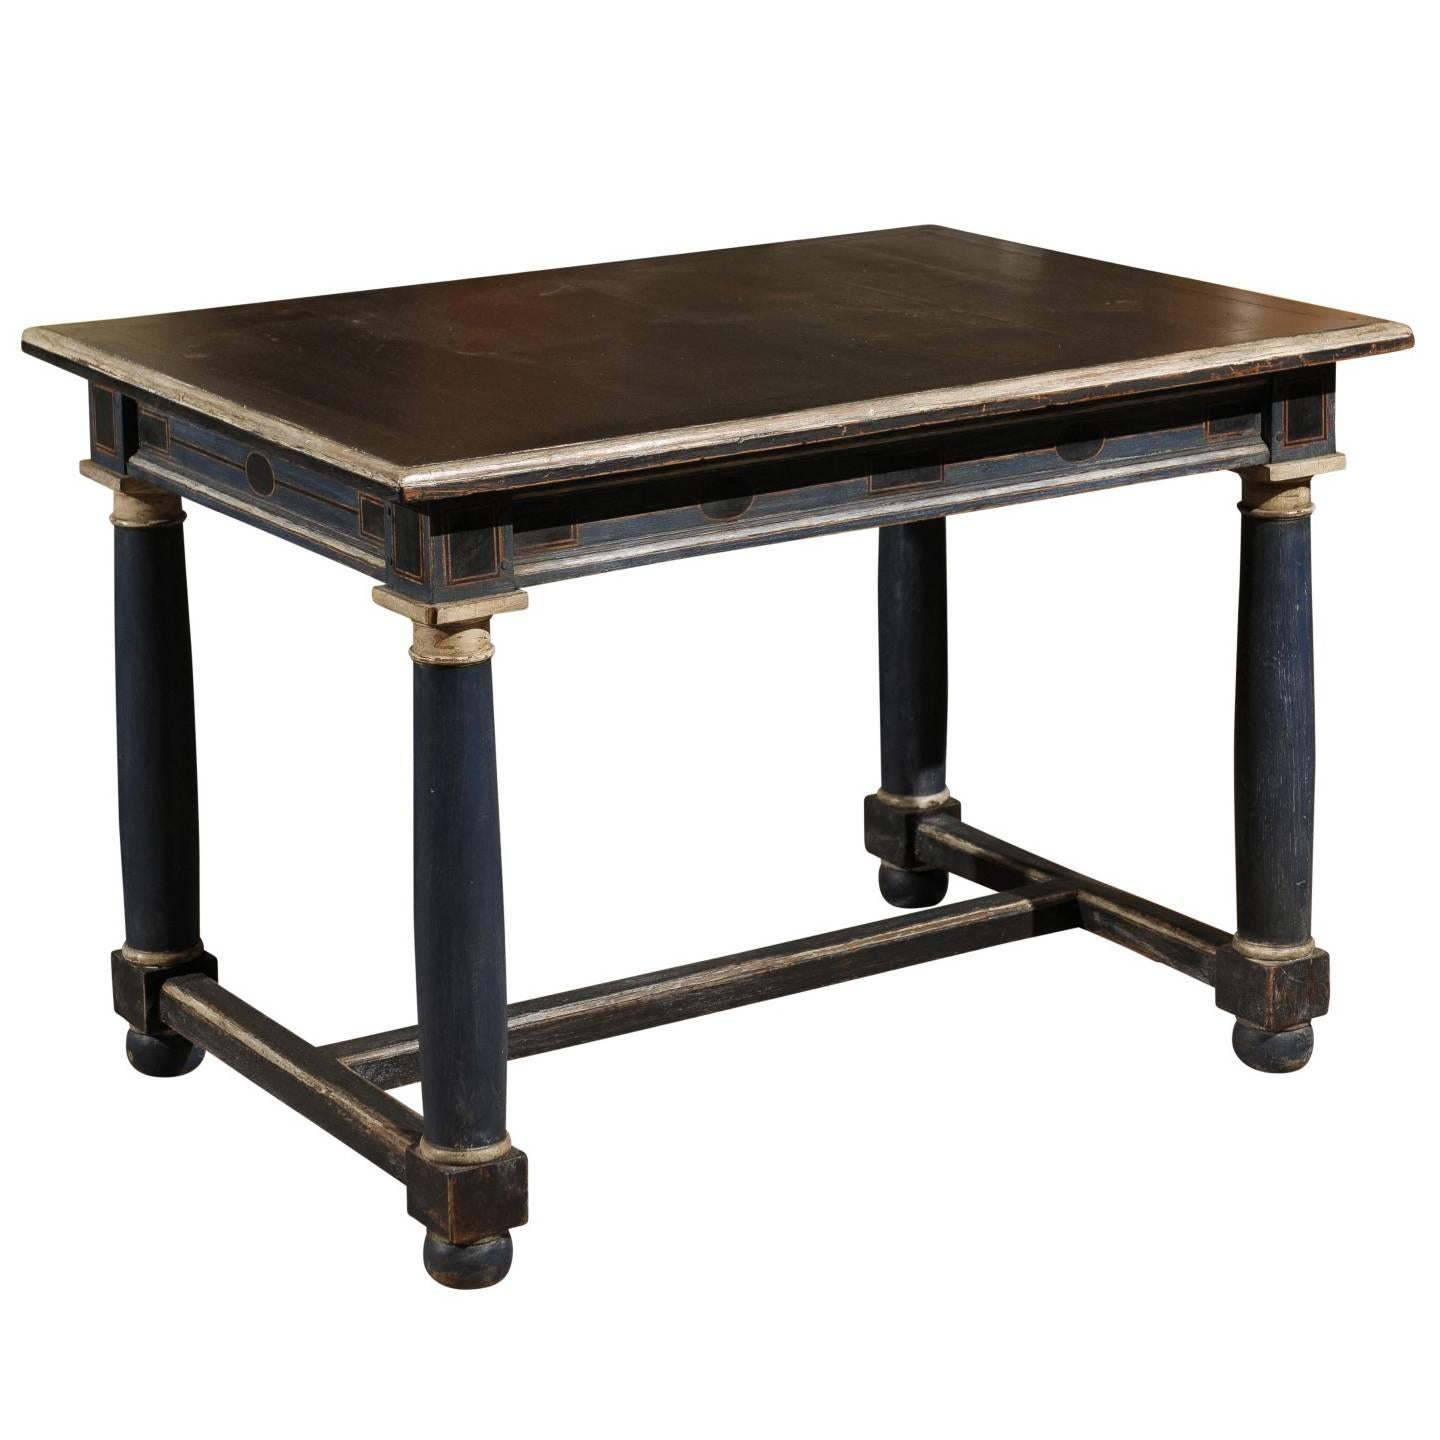 19th Century Painted Oak Table from France